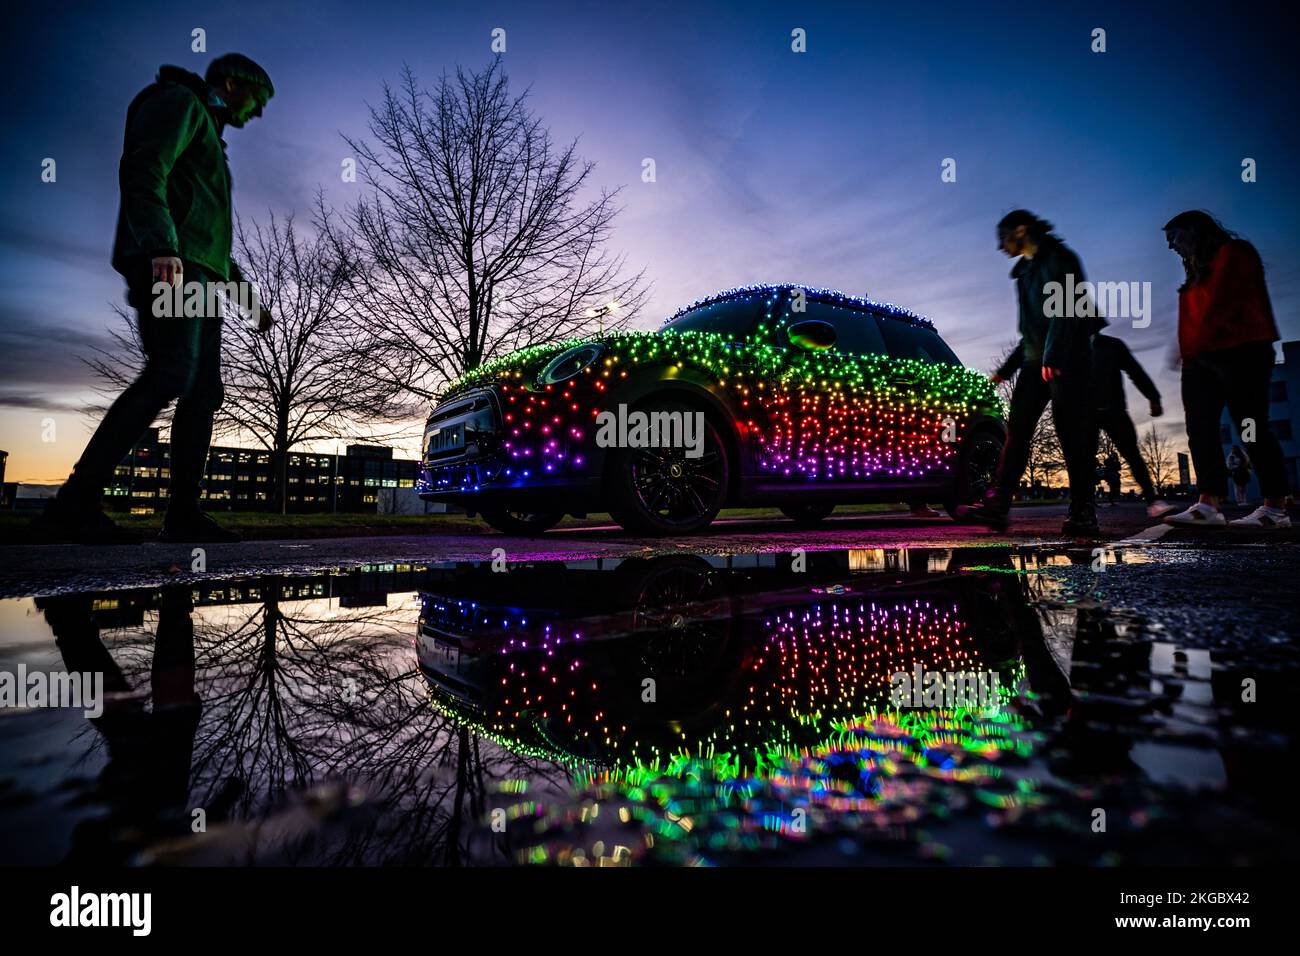 People walk past an illuminated Mini car at the Mini Plant in Oxford. The driver of a Mini decorated in 3,000 twinkling lights hopes to 'bring little moments of joy to people's lives' this Christmas and raise over £10,000 for charity. Nicholas Martin, 33, is celebrating his fifth year behind the wheel of his Festive Mini but has gone to new lengths to create an illuminative show with thousands of app-controlled, battery-powered lights to generate different light patterns, messages, and animations. Picture date: Thursday November 17, 2022. Stock Photo